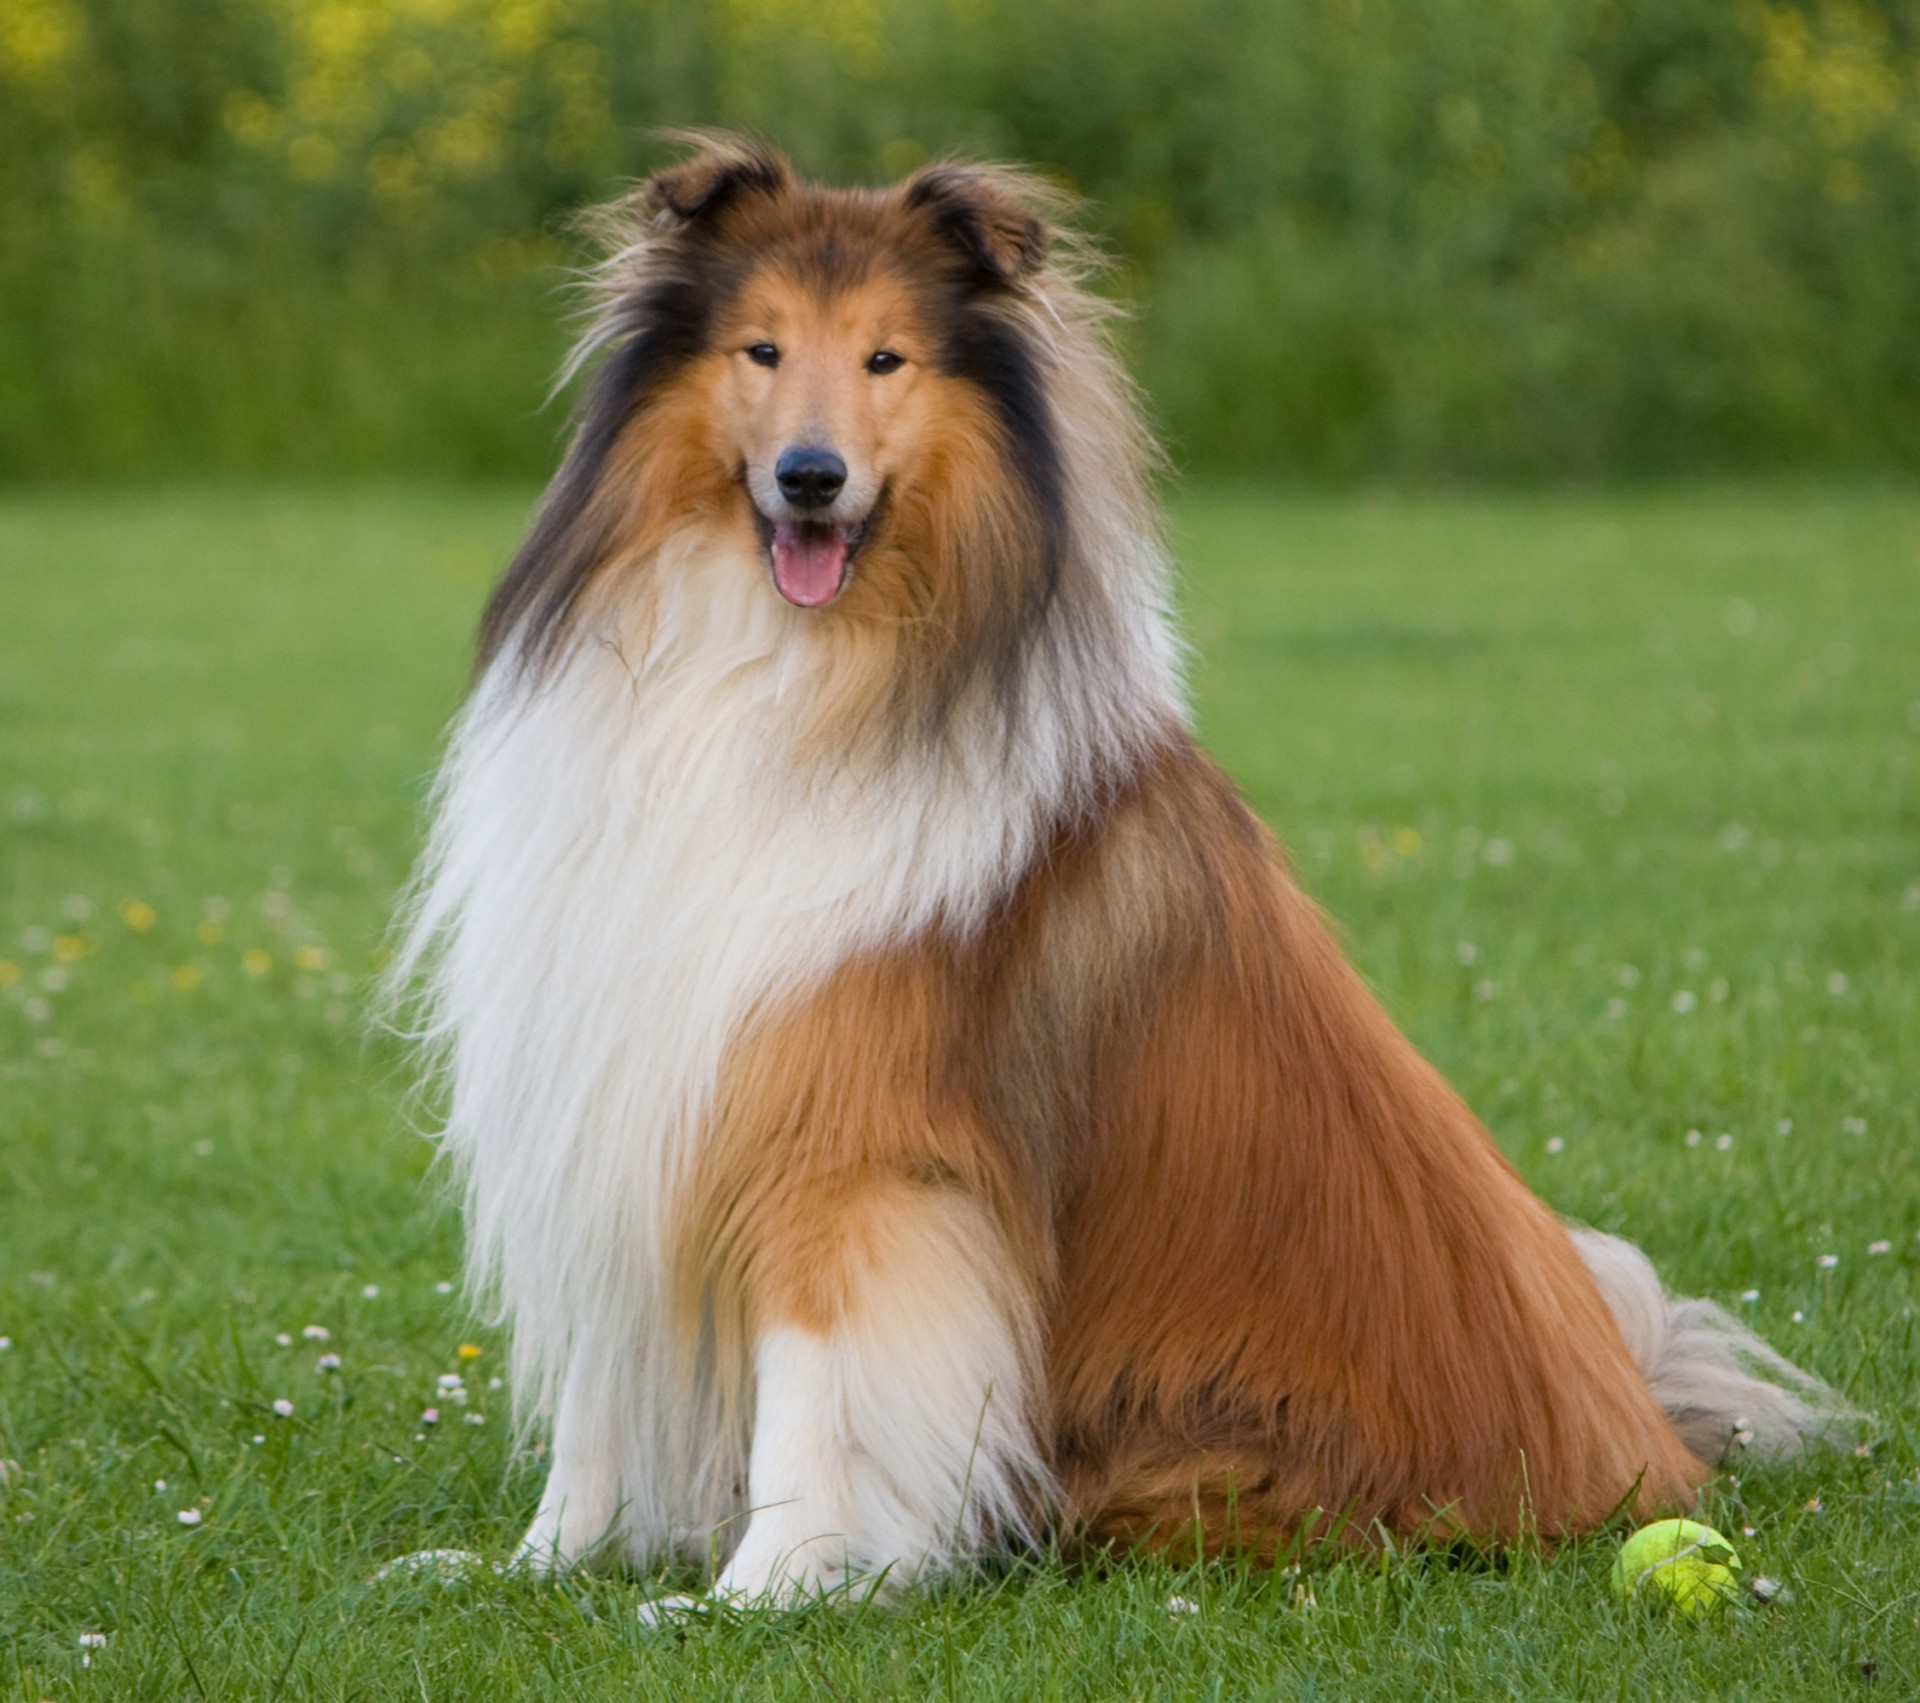 Beautiful portrait of a rough collie dog sitting on the green grass